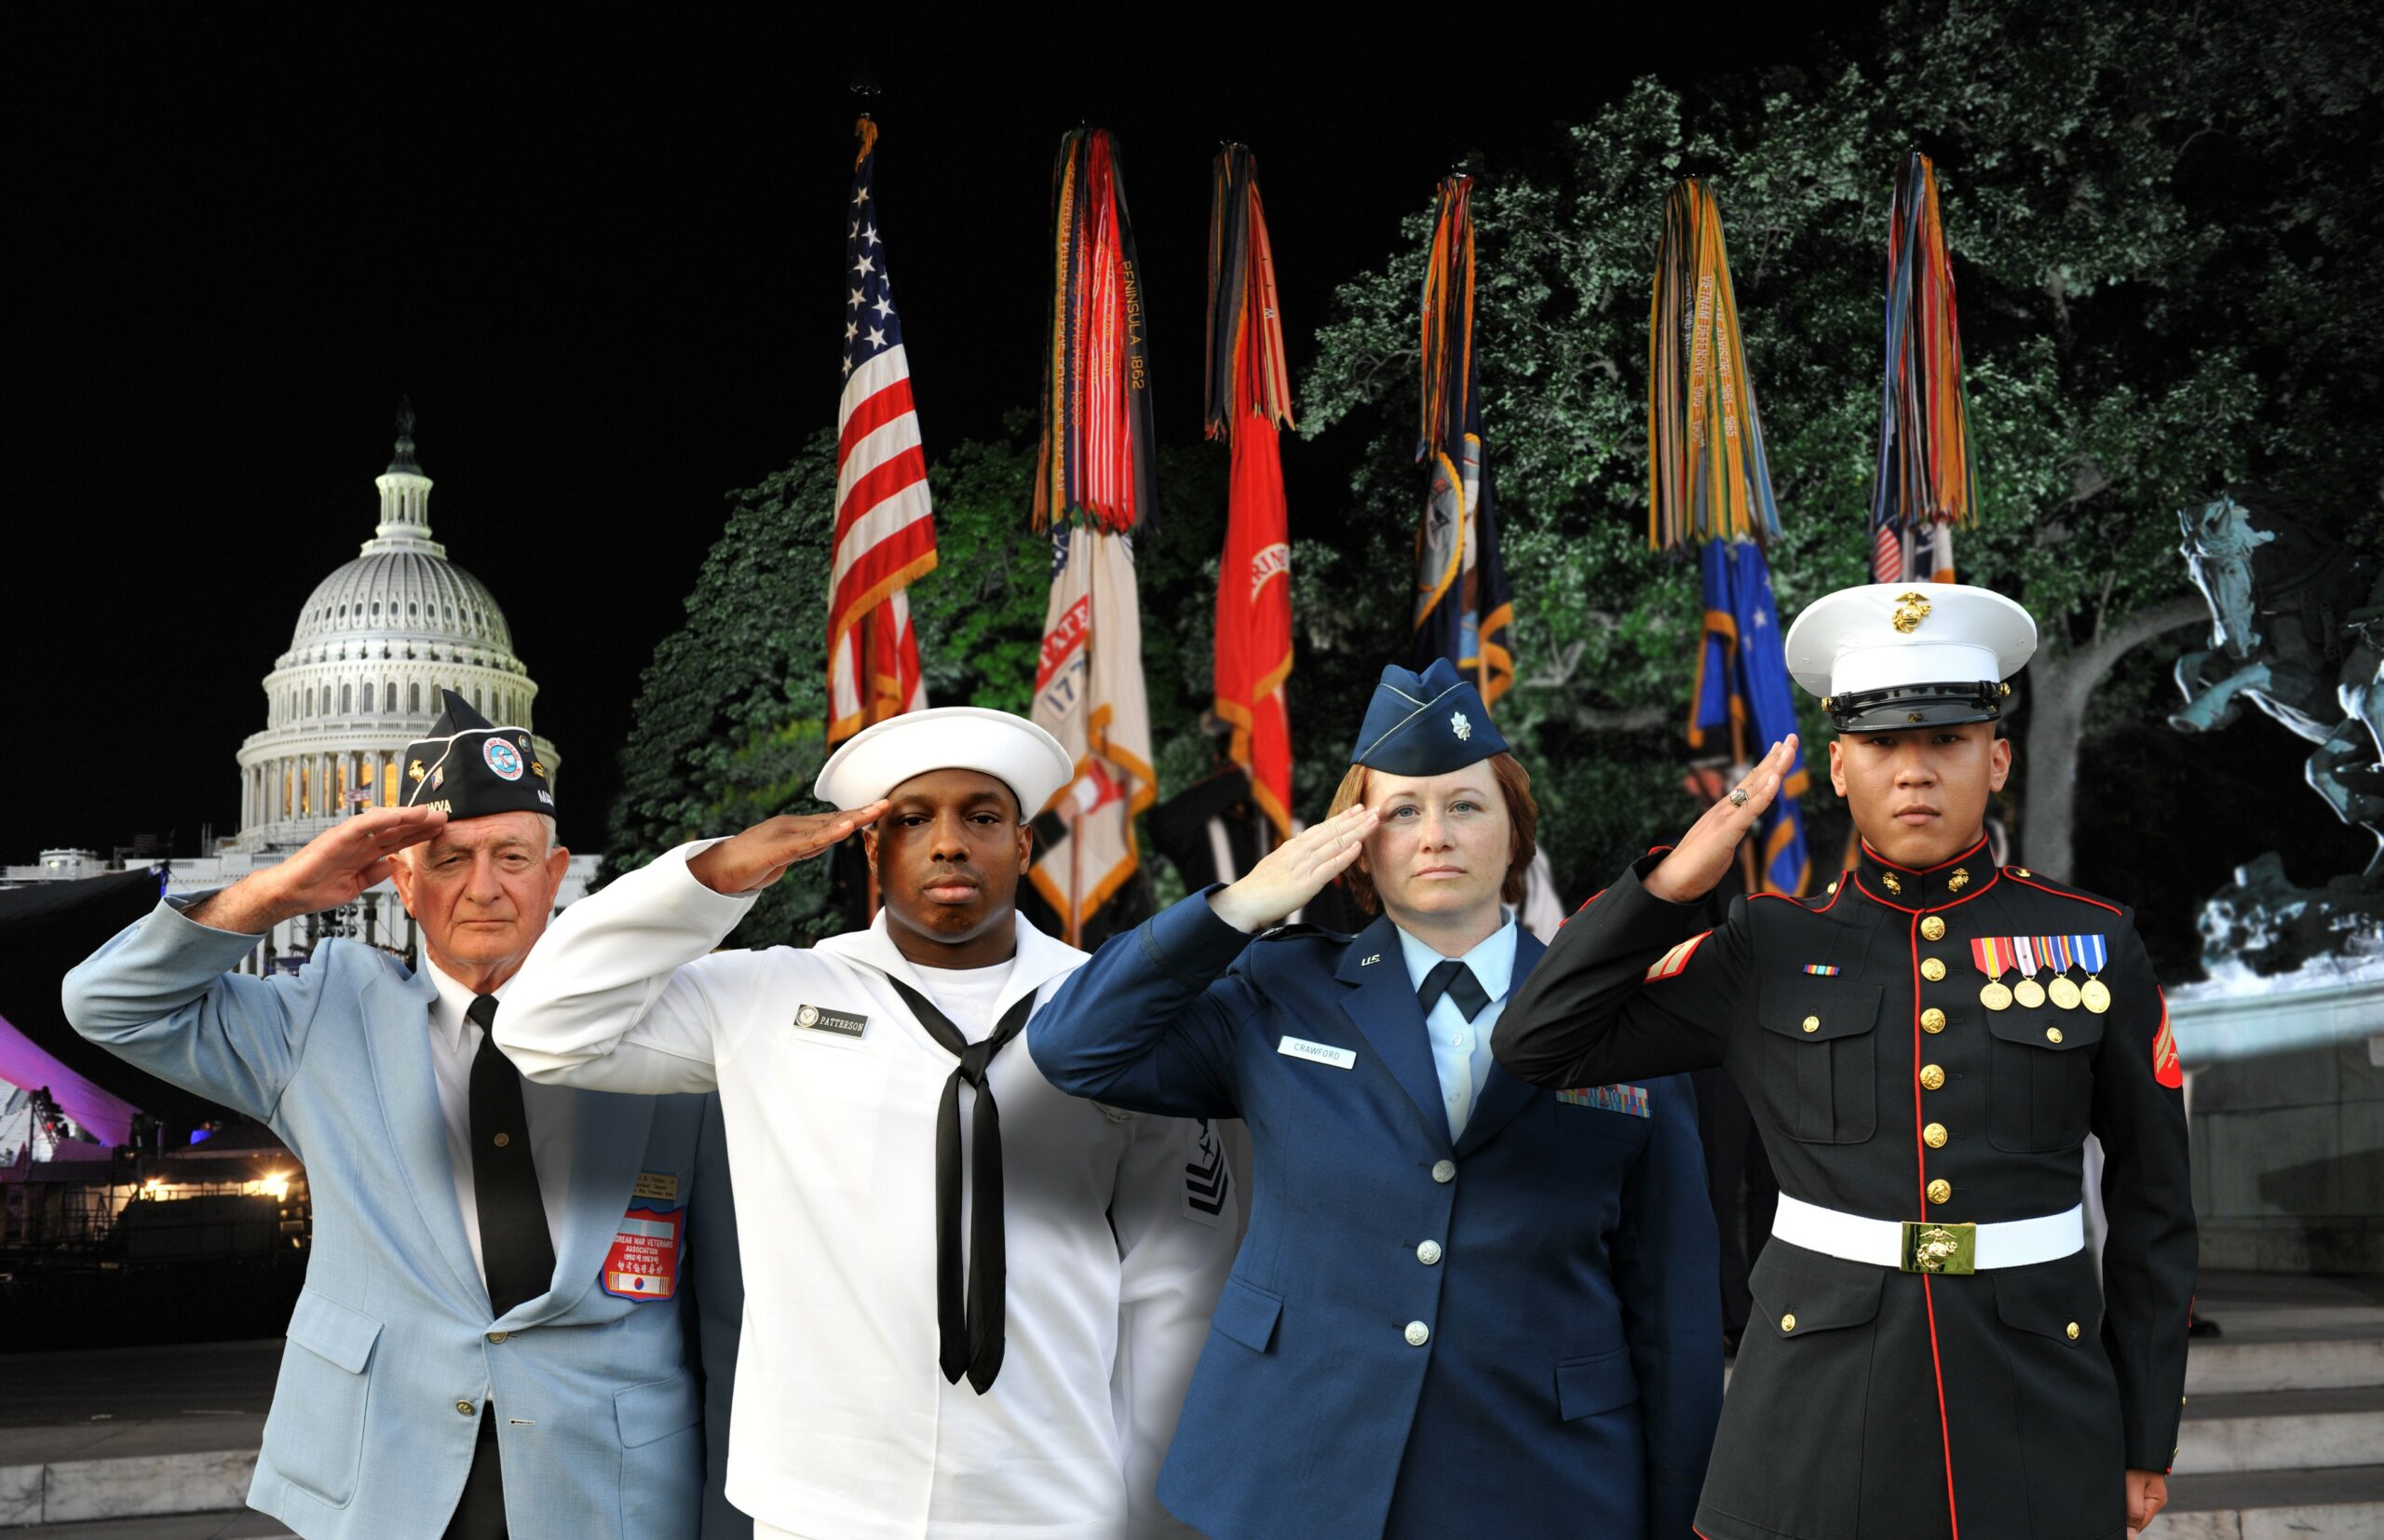 Members of the U.S. Armed Forces salute at the NATIONAL MEMORIAL DAY CONCERT.